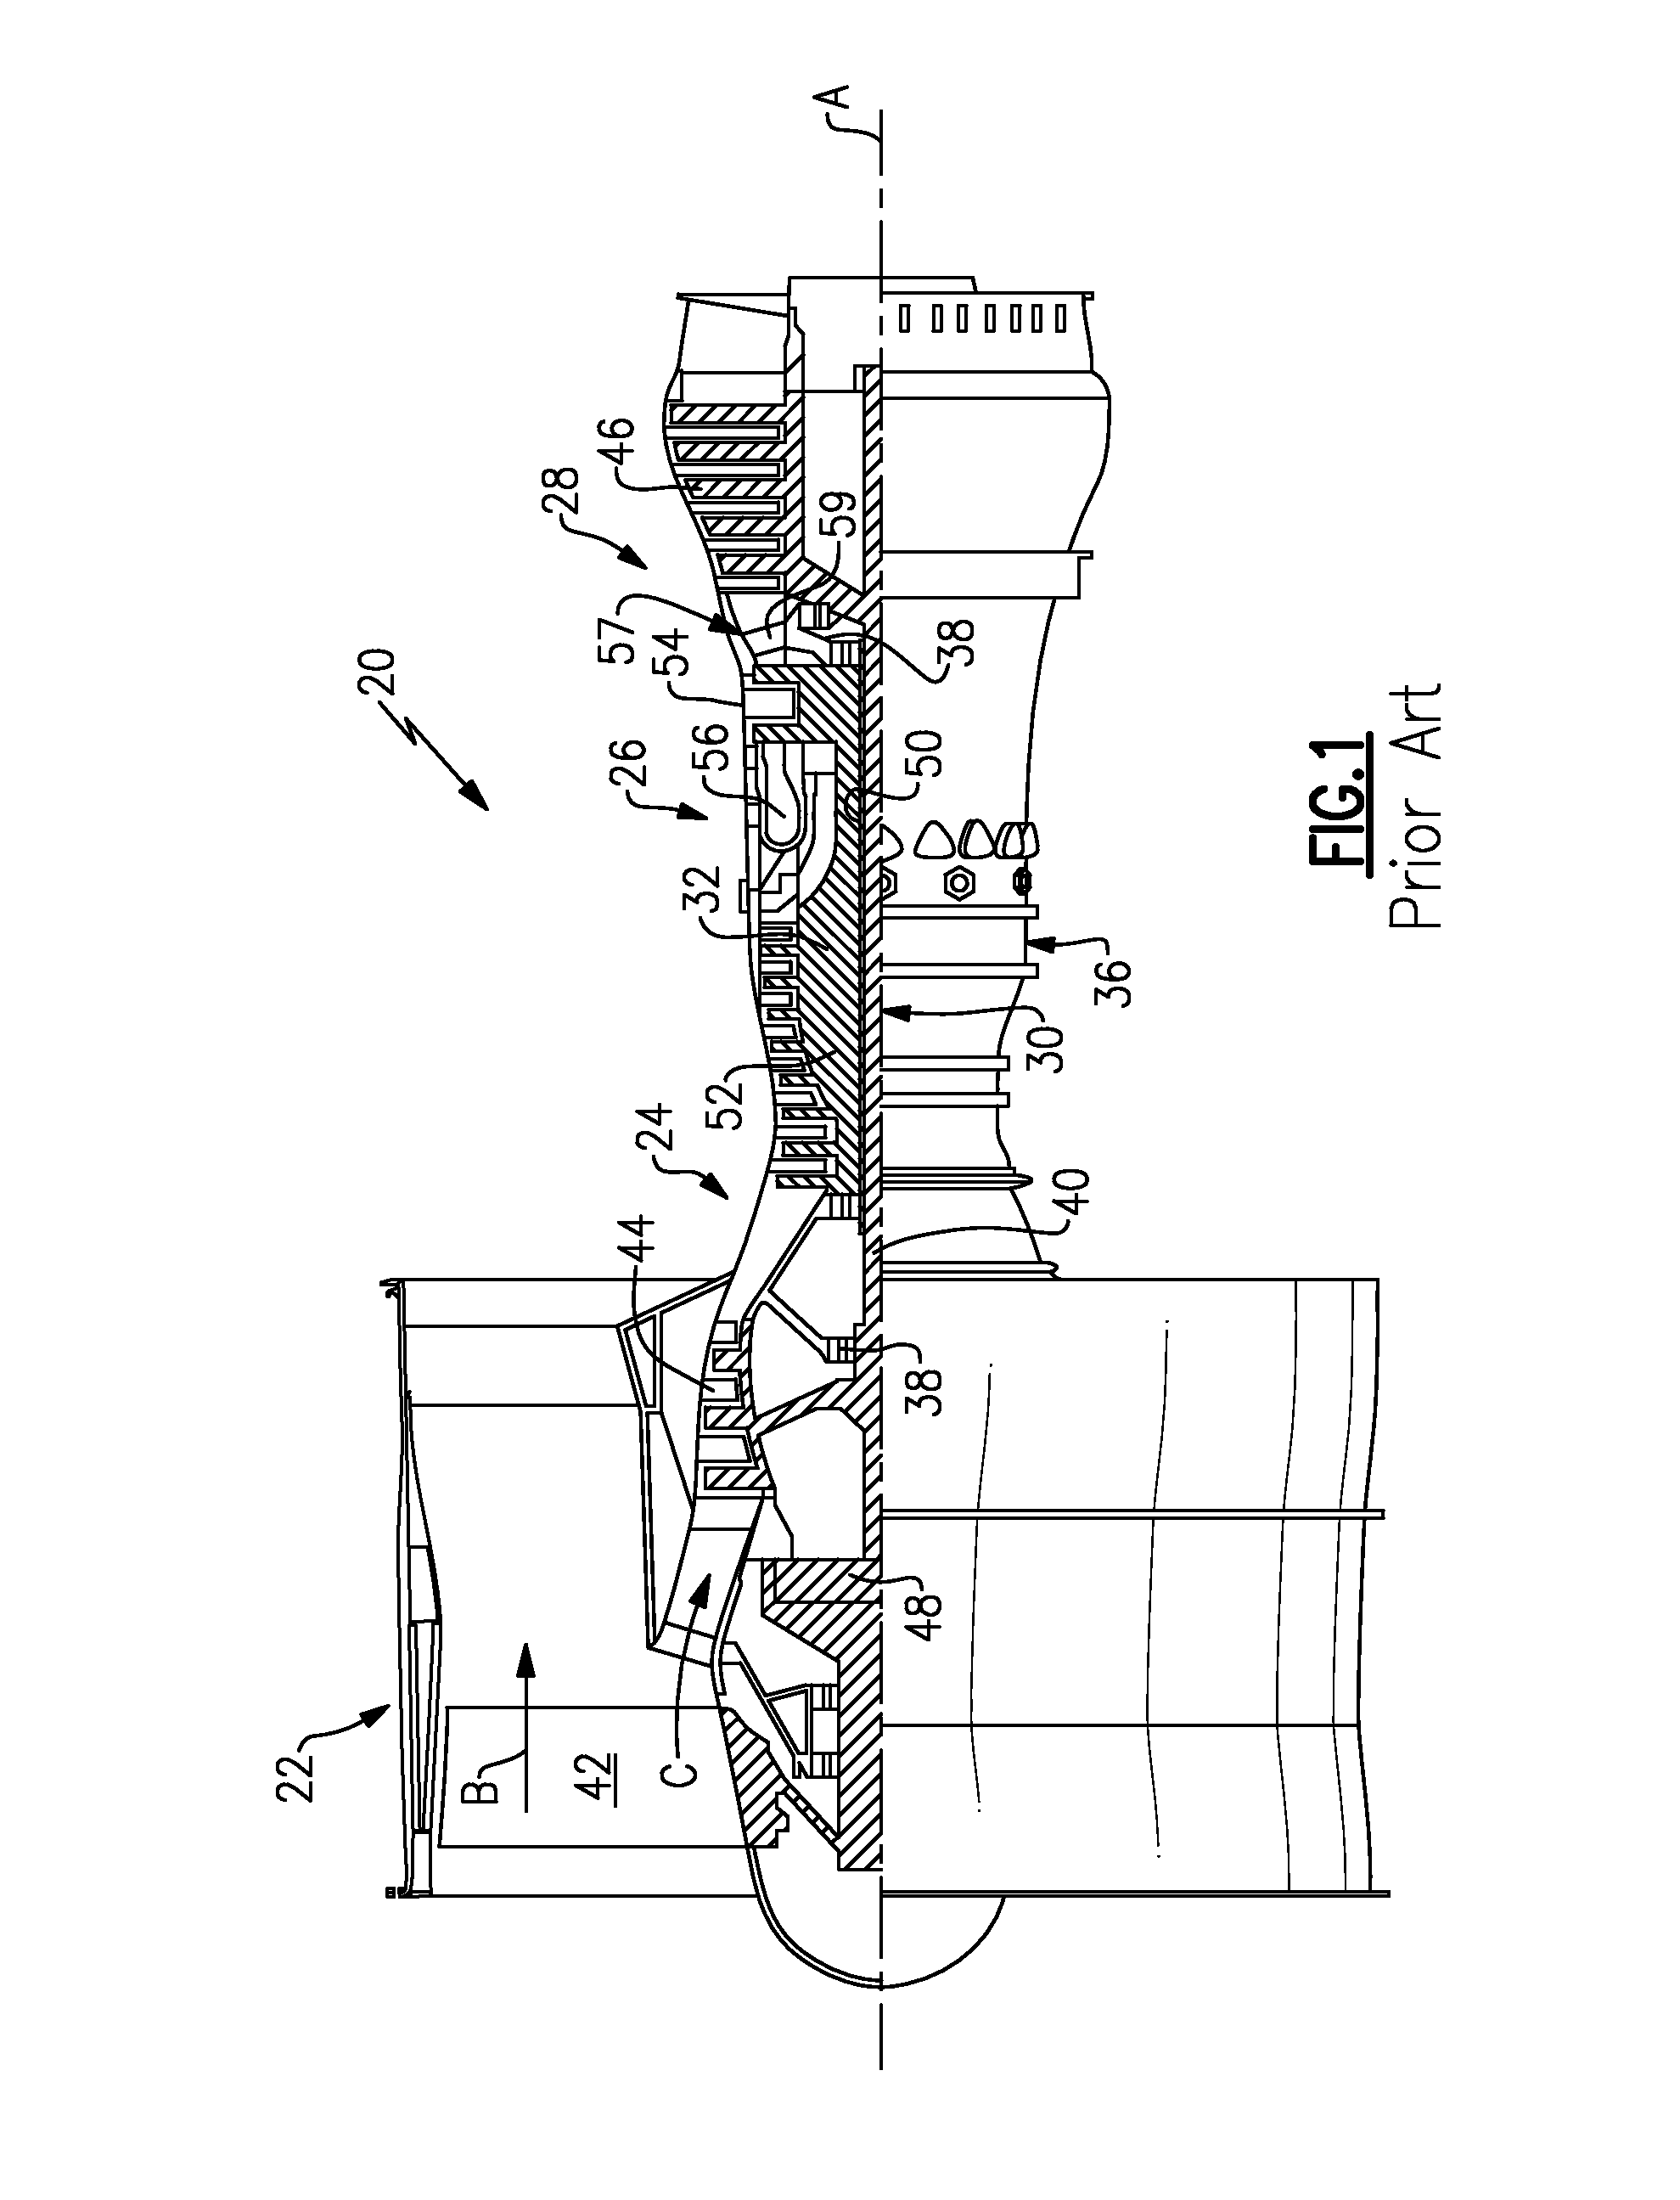 Anti-icing core inlet stator assembly for a gas turbine engine